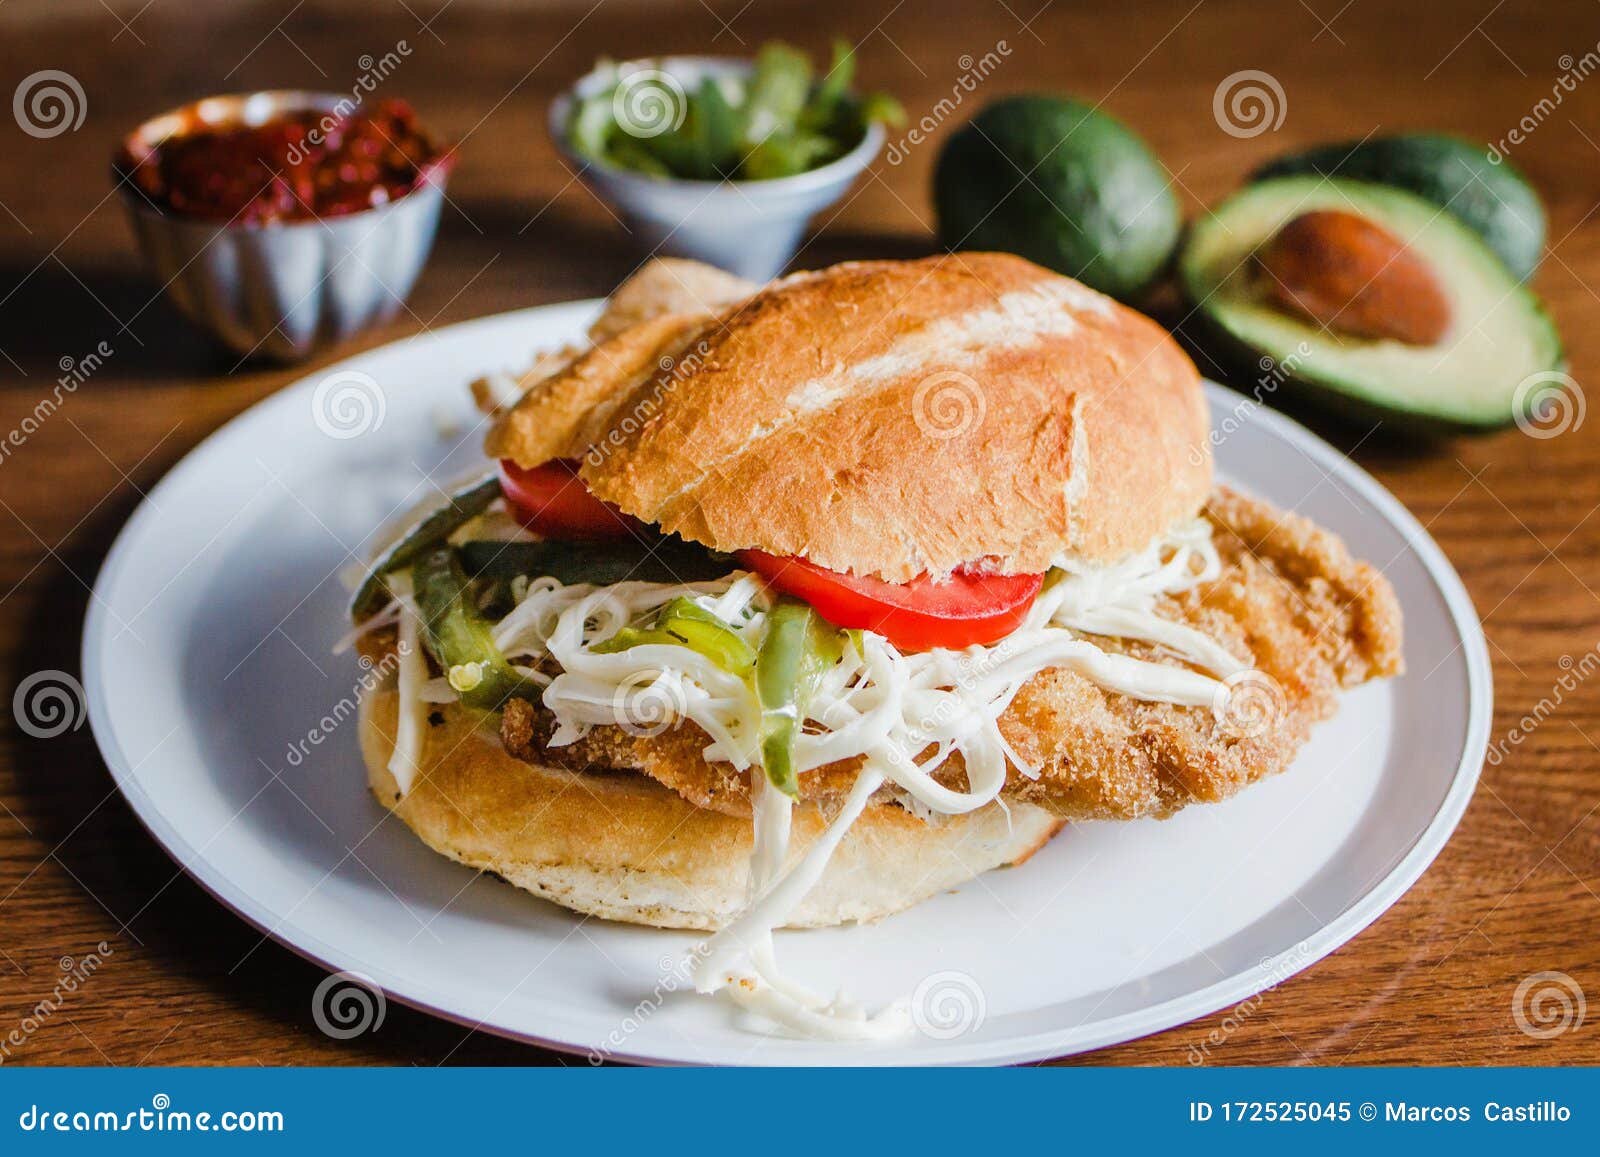 mexican torta is chicken milanese sandwich with avocado, chili chipotle and oaxaca cheese